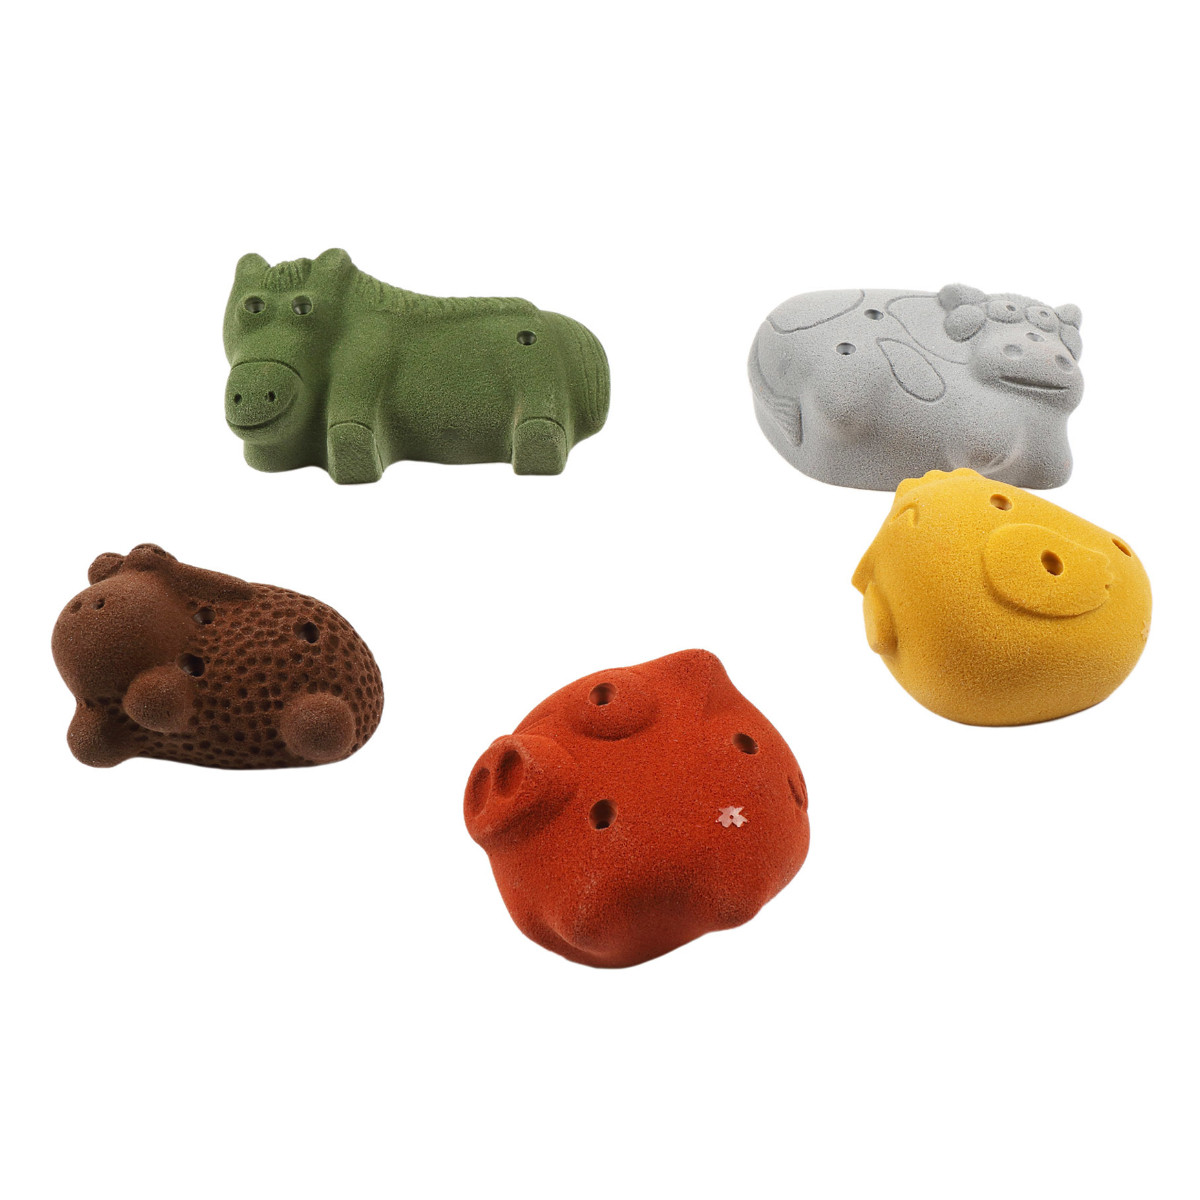 Farm Animal Climbing Holds - Screw-ons - Mixed Earth Tone Colors